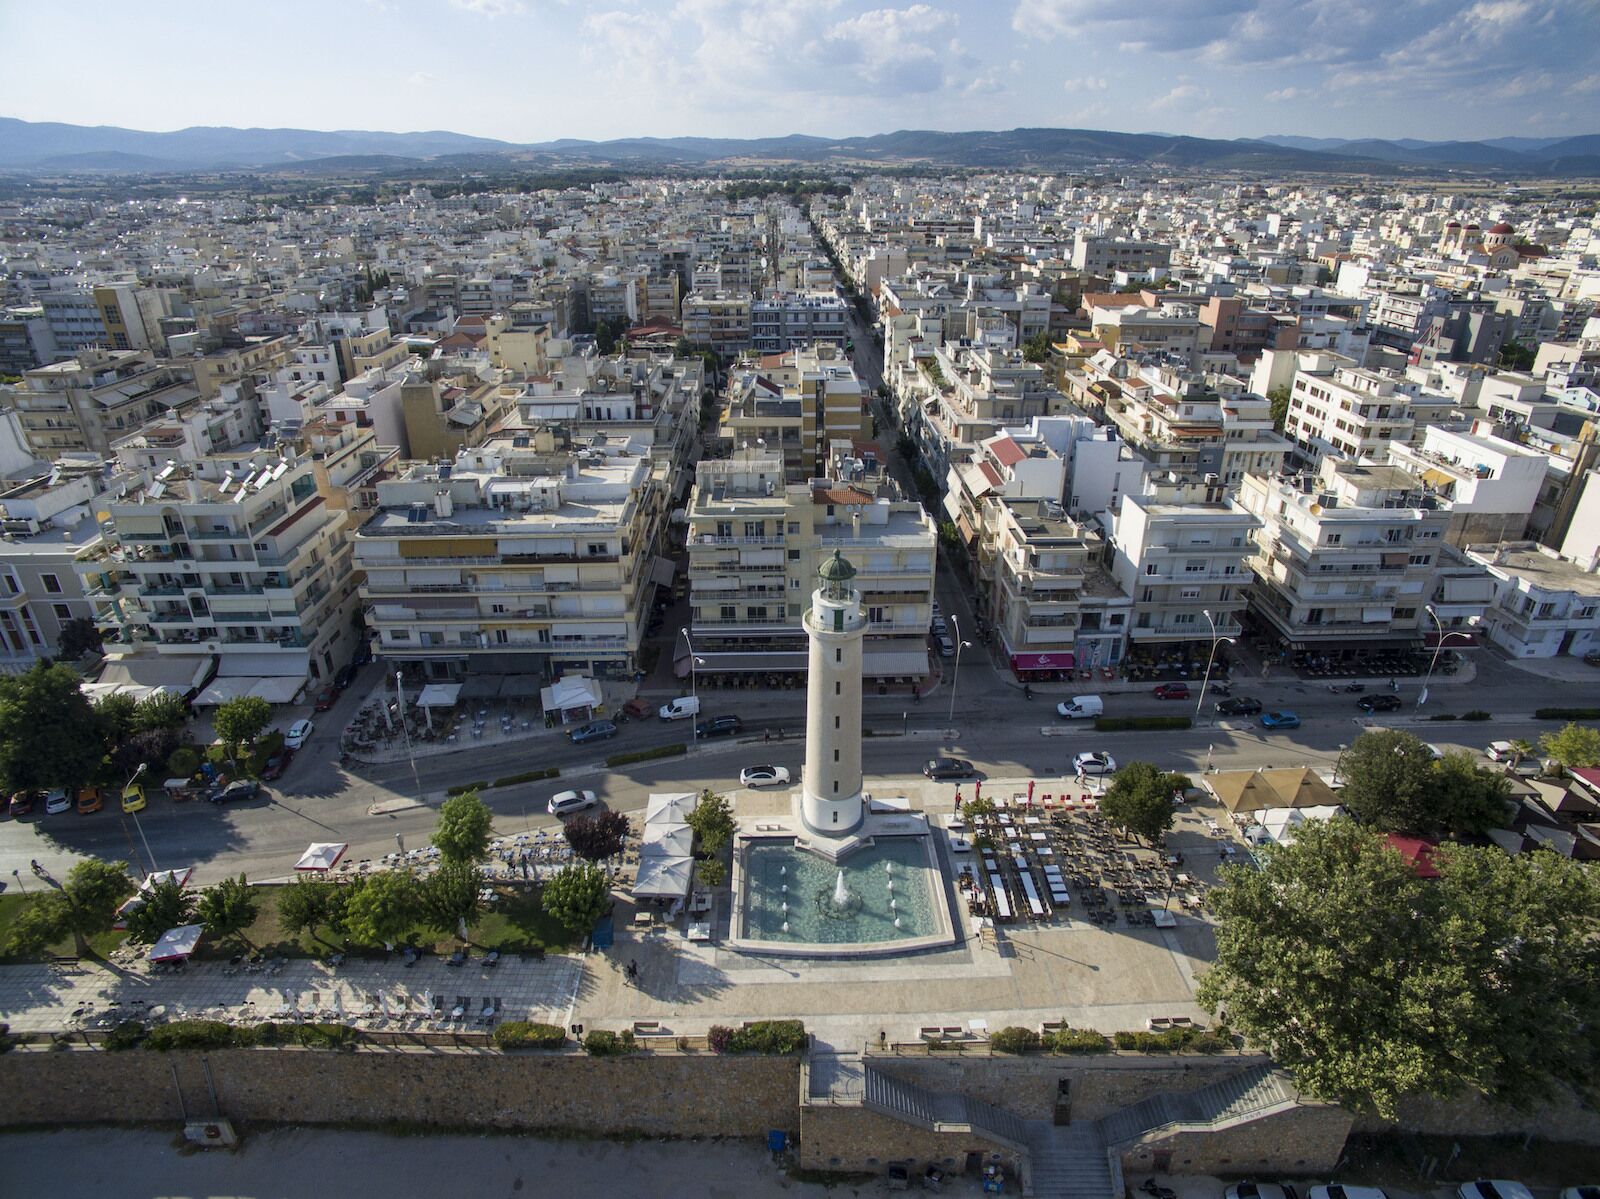 Alexandroupolis city, Greece - 21 July 2016 Drone / Aerial image of Alexandroupoli city in northern Greece near Turkey. Famous for the lighthouse downtown, tourism, commercial port and friendly people